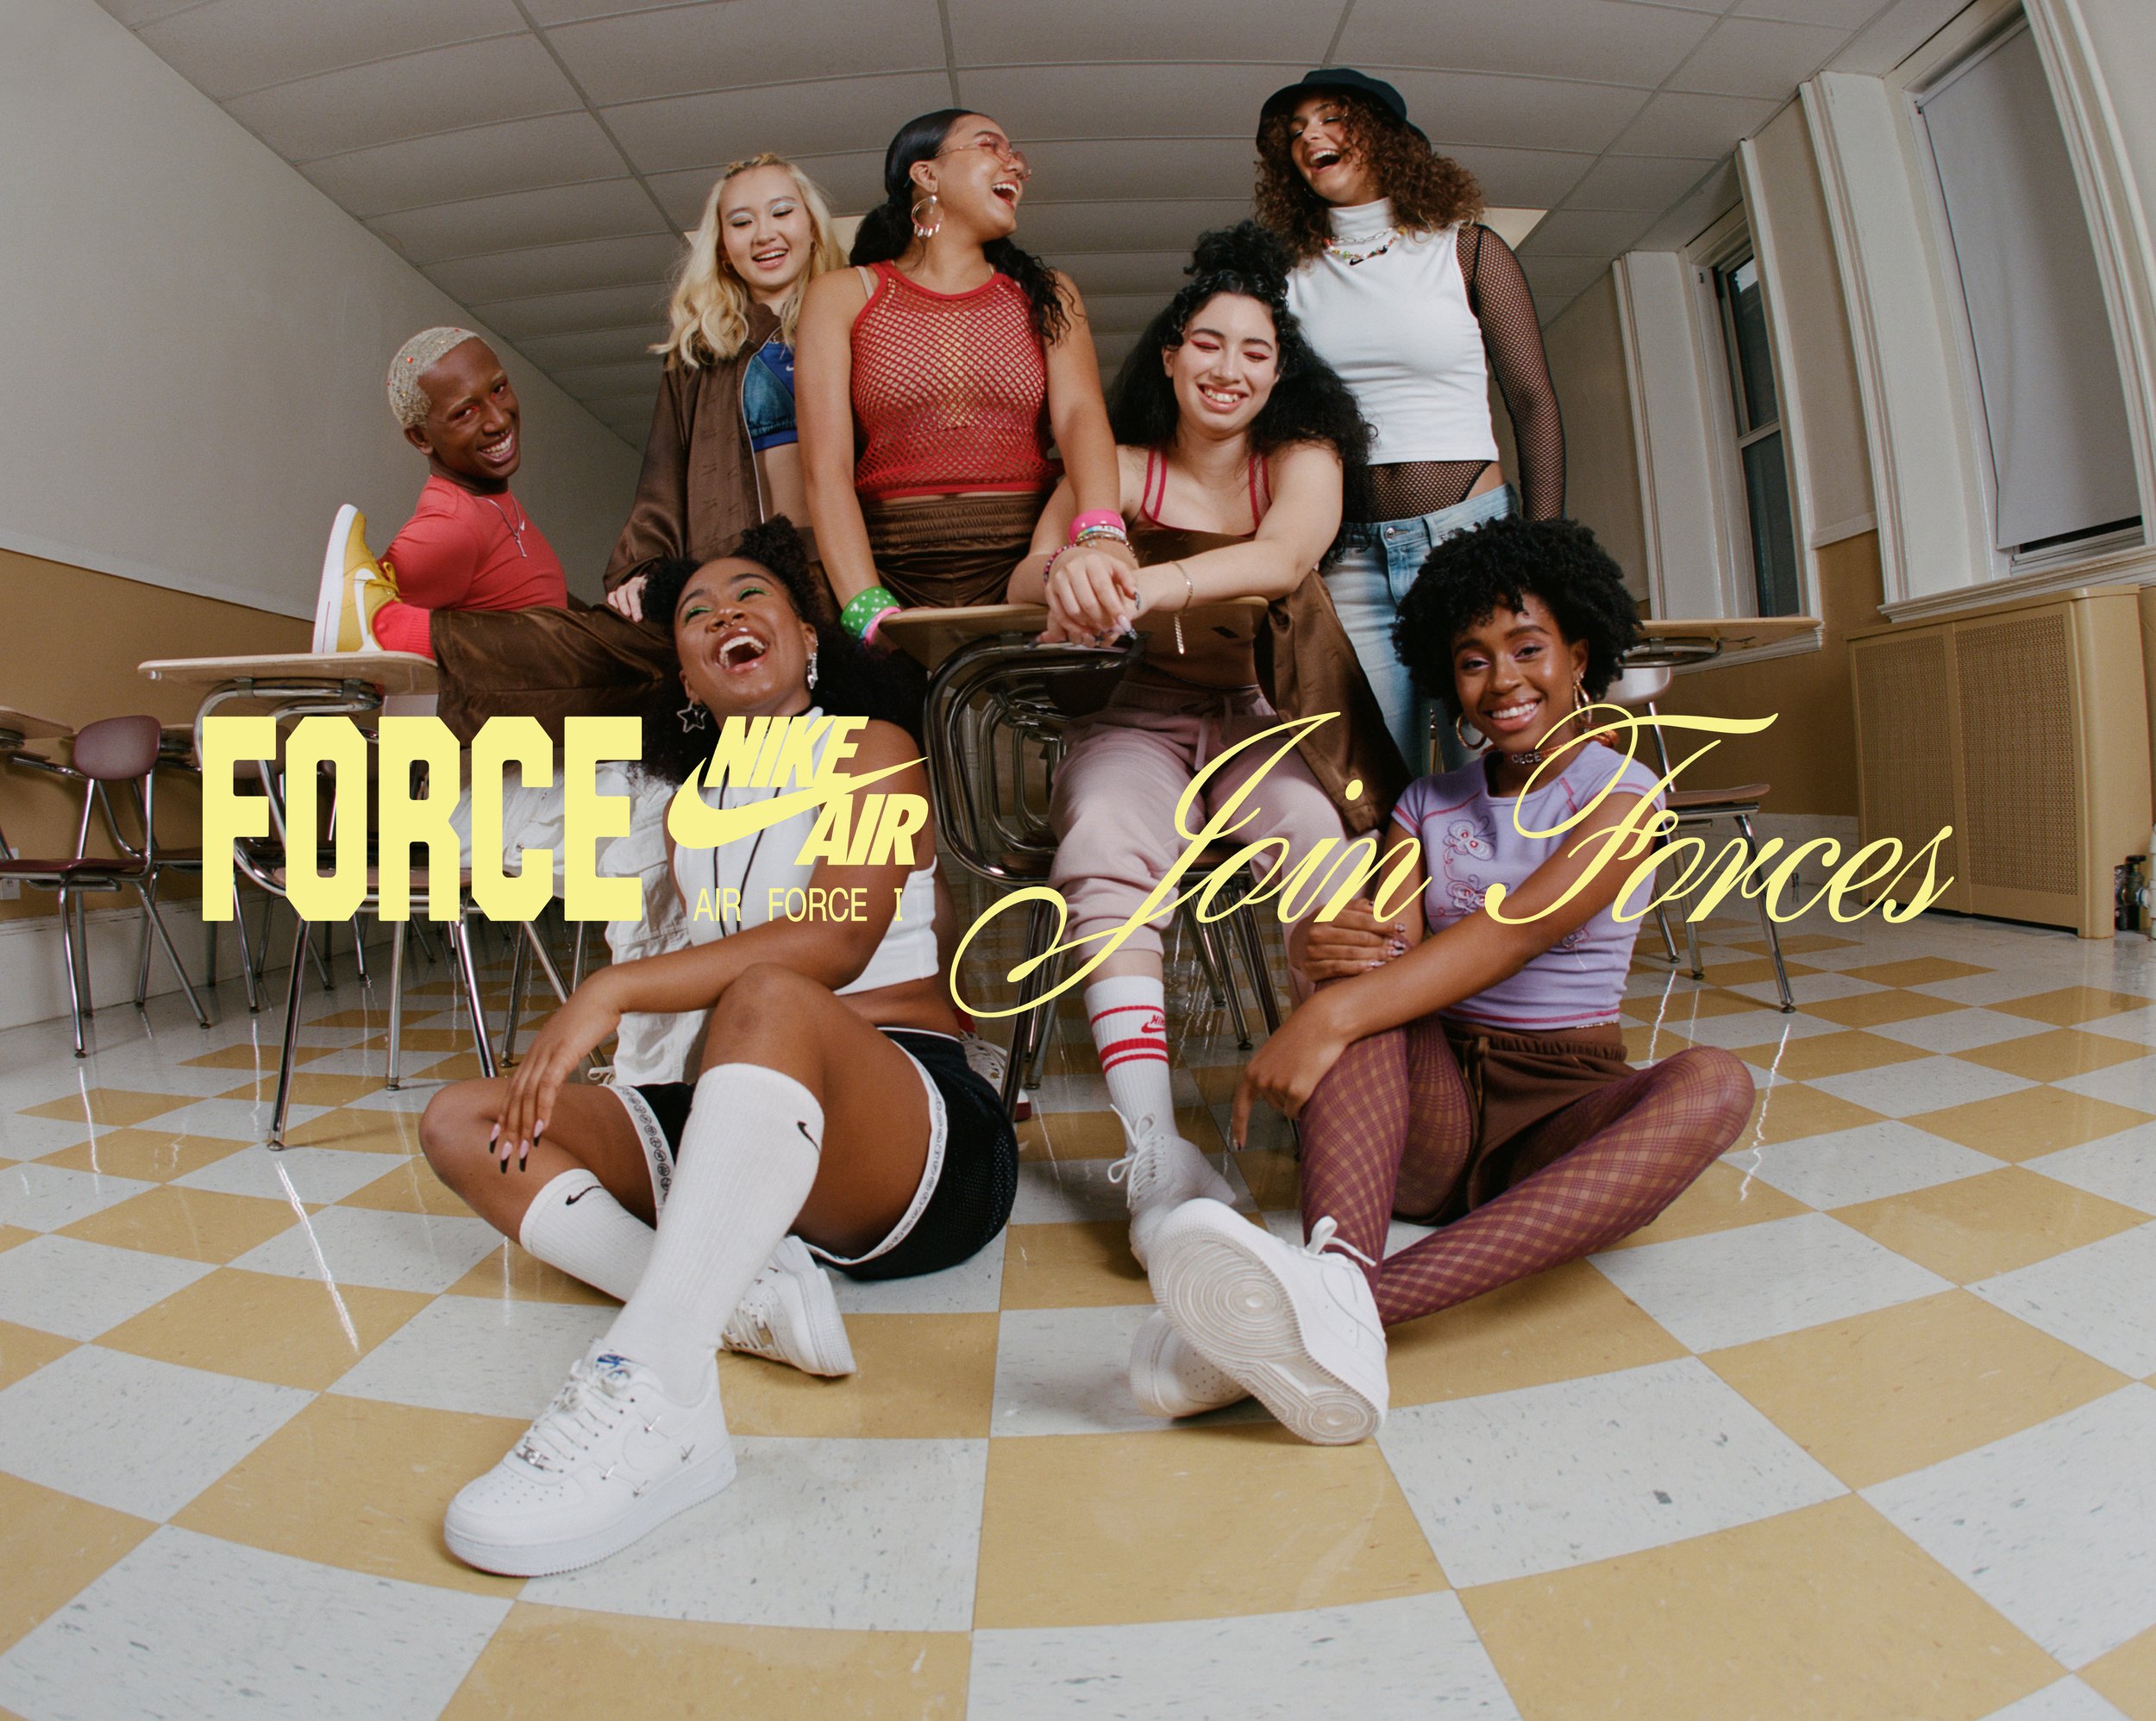  Join Forces: Celebrating 40 Years of Force  Air Force 1 HO22  Role: Art Director Photographer: Sophie Hur Stylist: Beatriz Maues Dancers: Nevaeh, Cece, Tati, Maya, Gabby, Natalia, Diego 